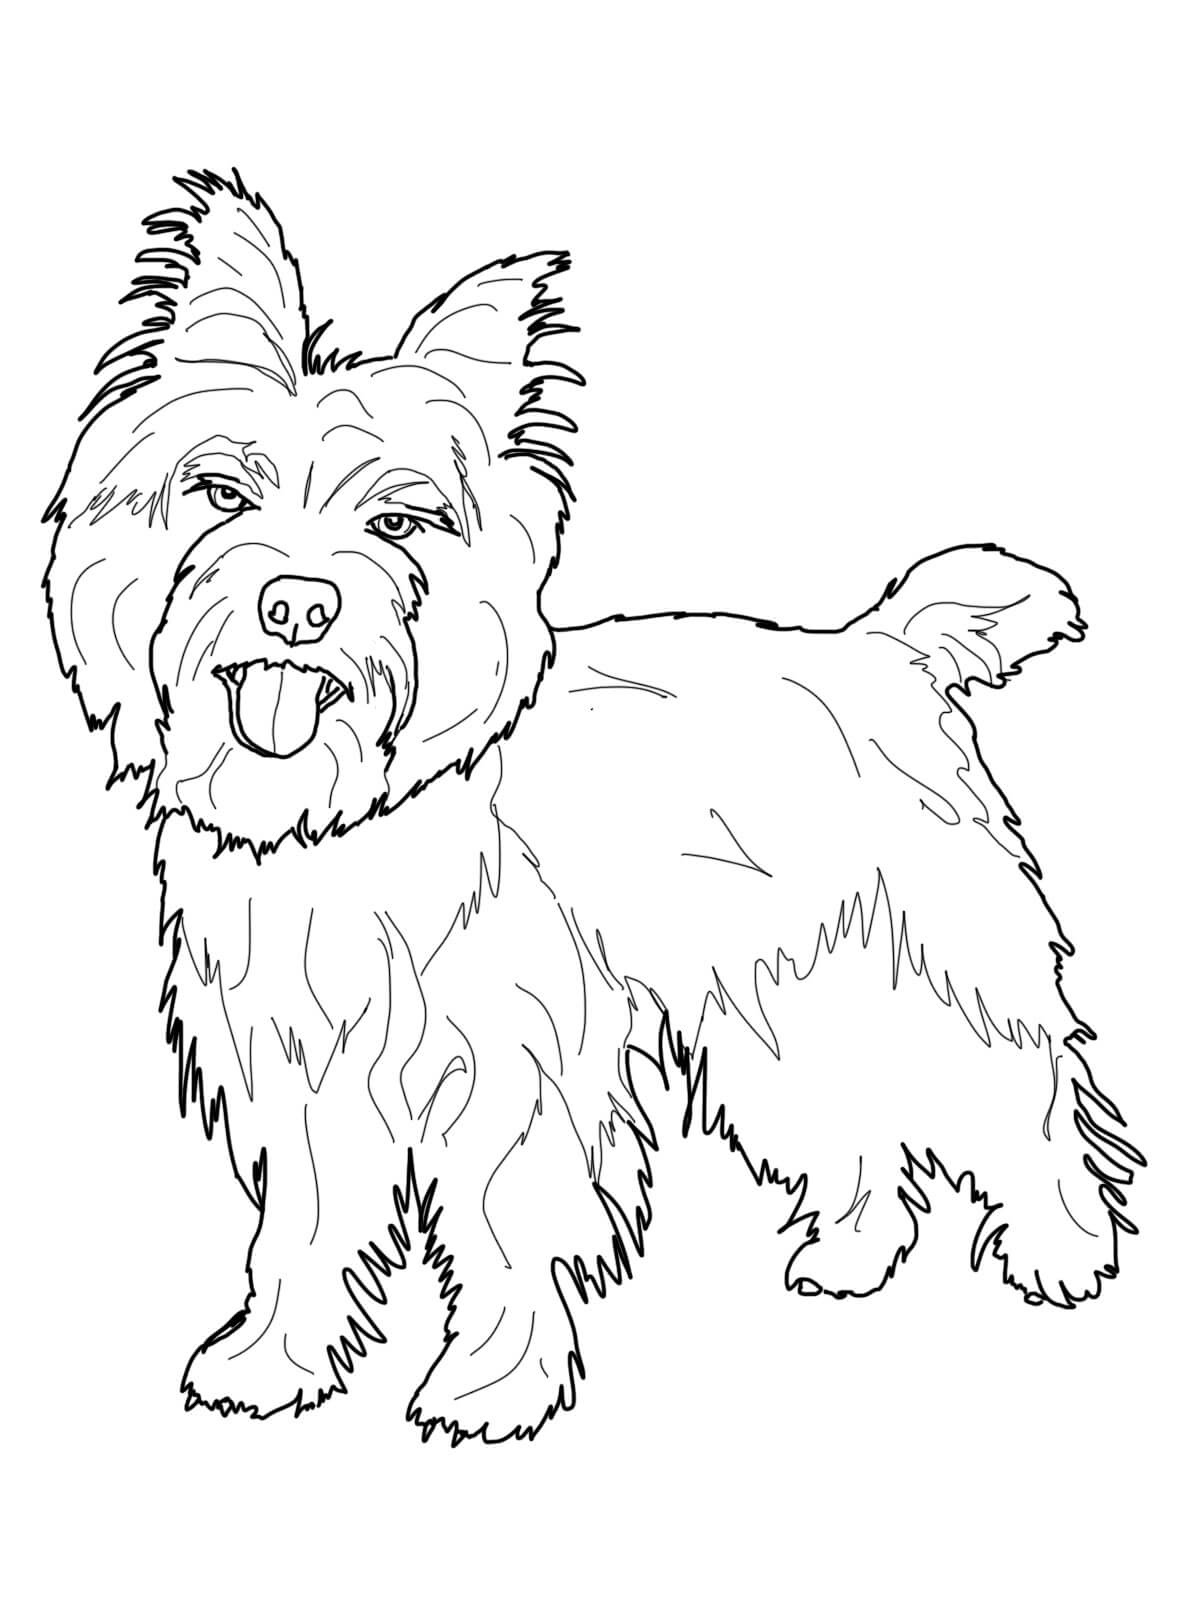 Cairn Terrier Coloring Pages   Dog Coloring Pages   Coloring Pages ...